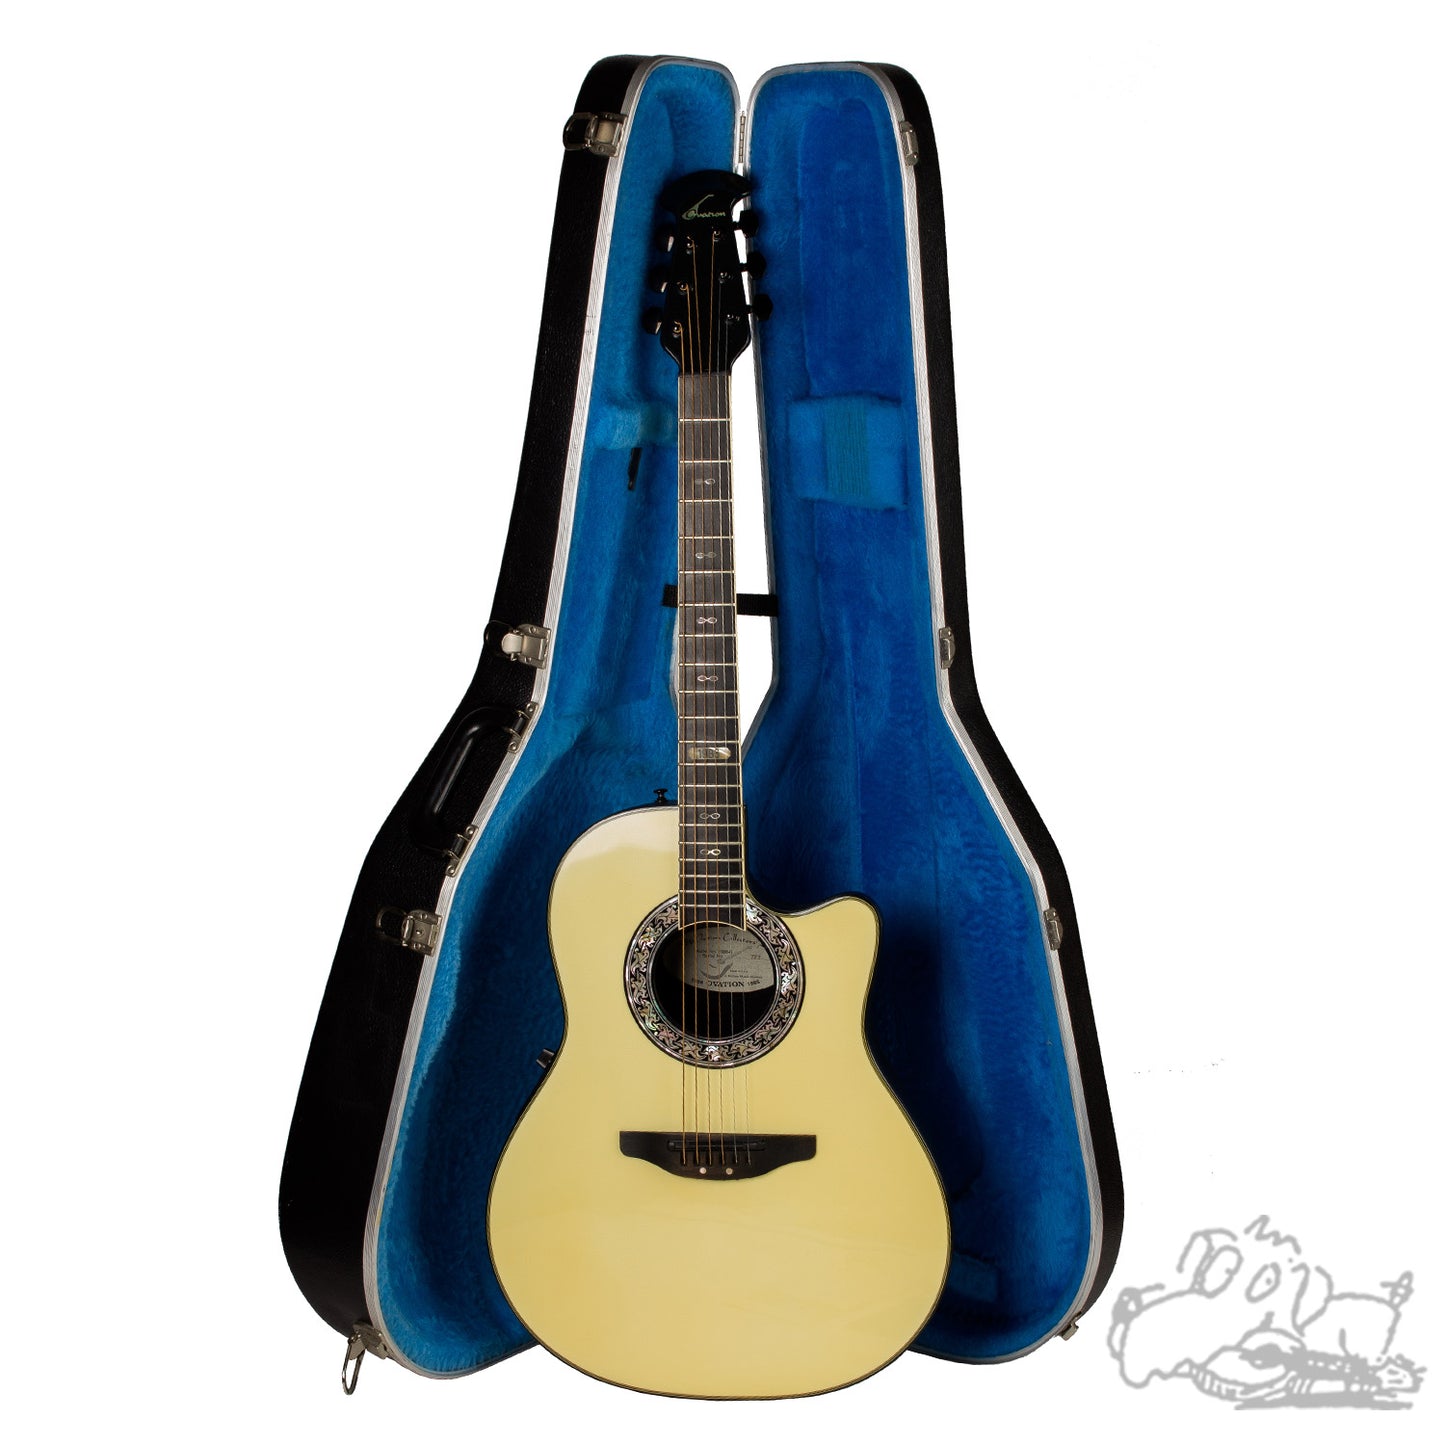 Previously Owned 1986 Ovation 20th Anniversary Model